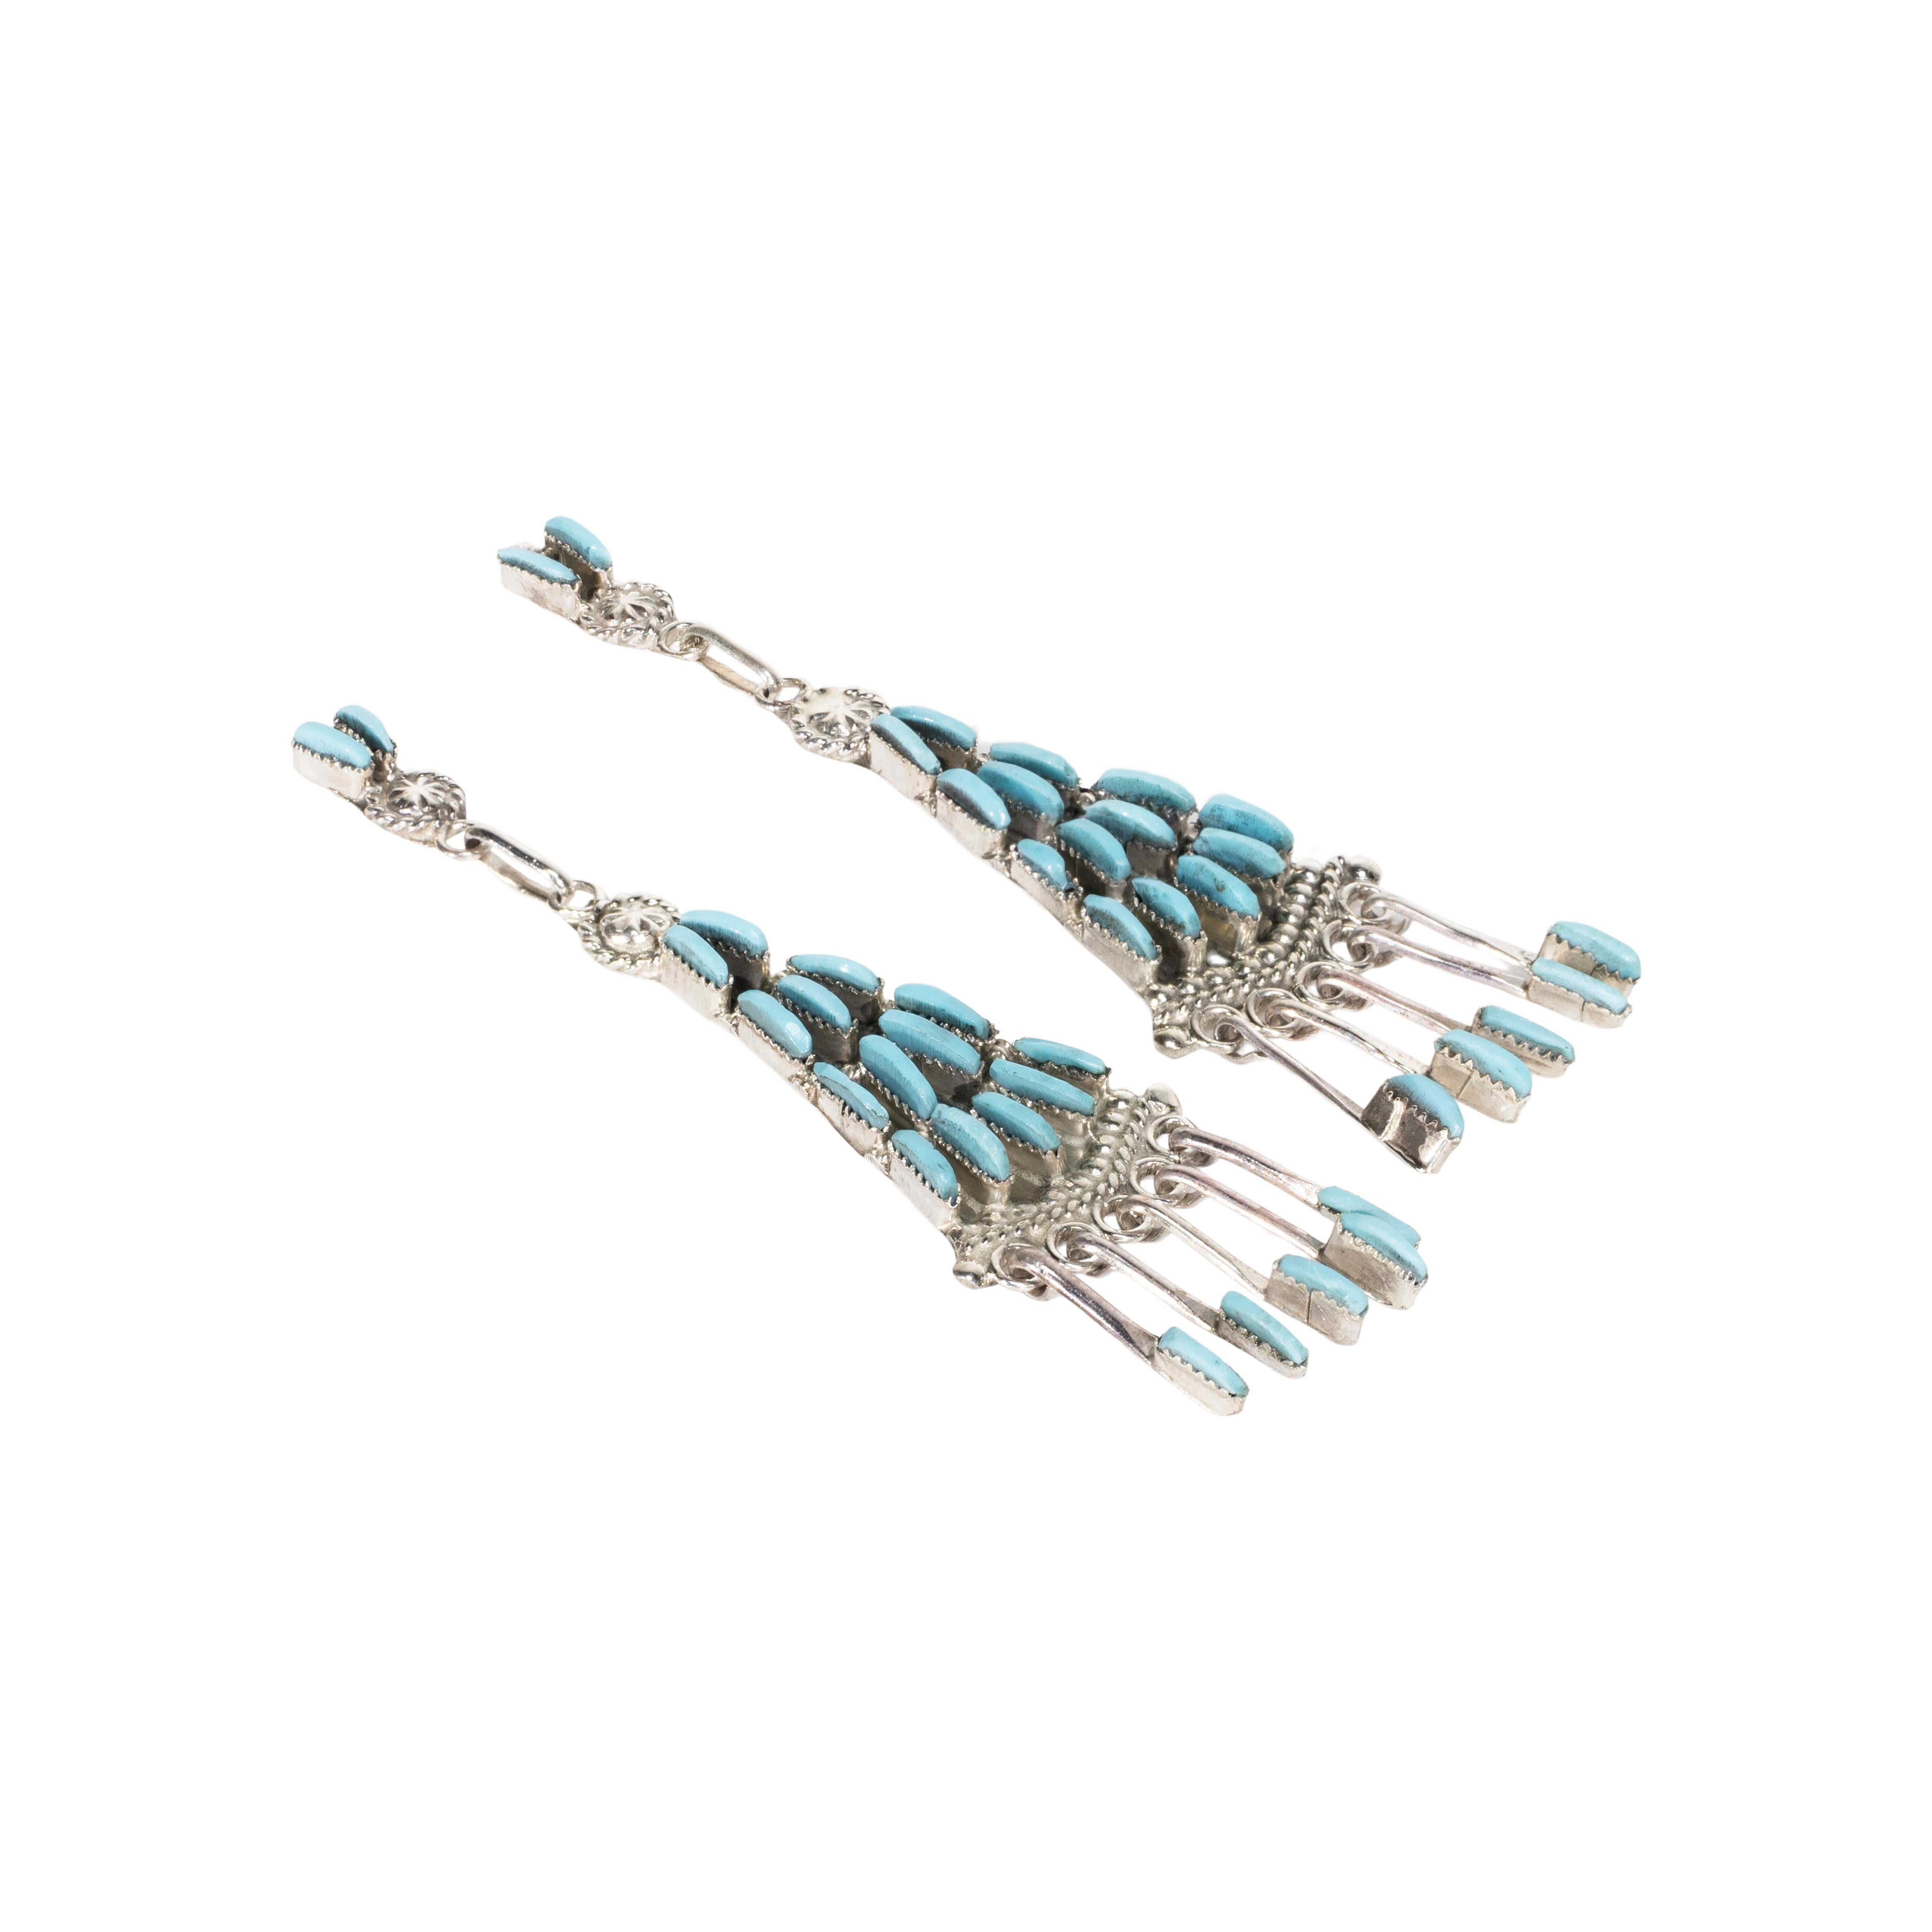 Zuni Sleeping Beauty turquoise and sterling earrings. Lightweight sterling post backs with 21 clear Sleeping Beauty stones set in shadow box with twisted rope borders ending in silver spoon drops with turquoise tips. Nice shiny patina. 

PERIOD: